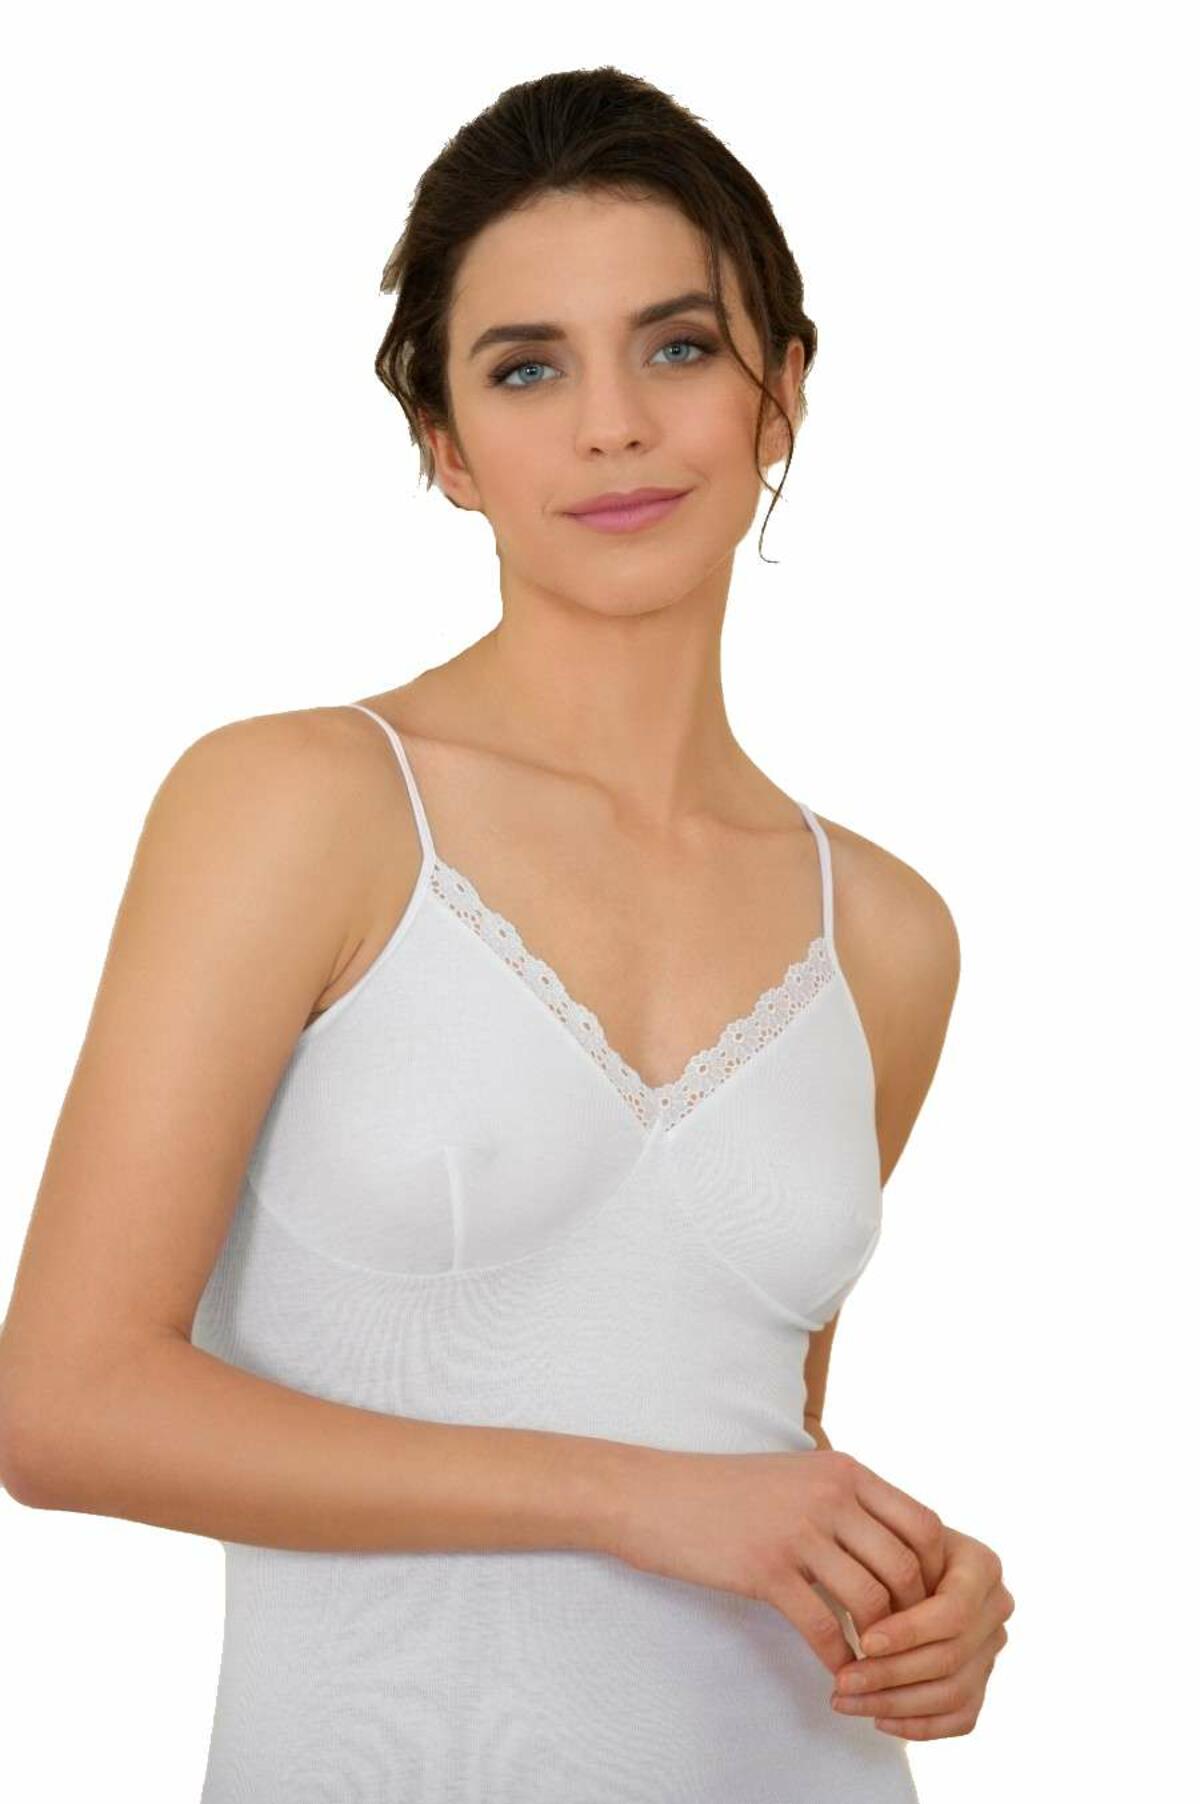 Women's cotton tank top with narrow shoulder and breast shape